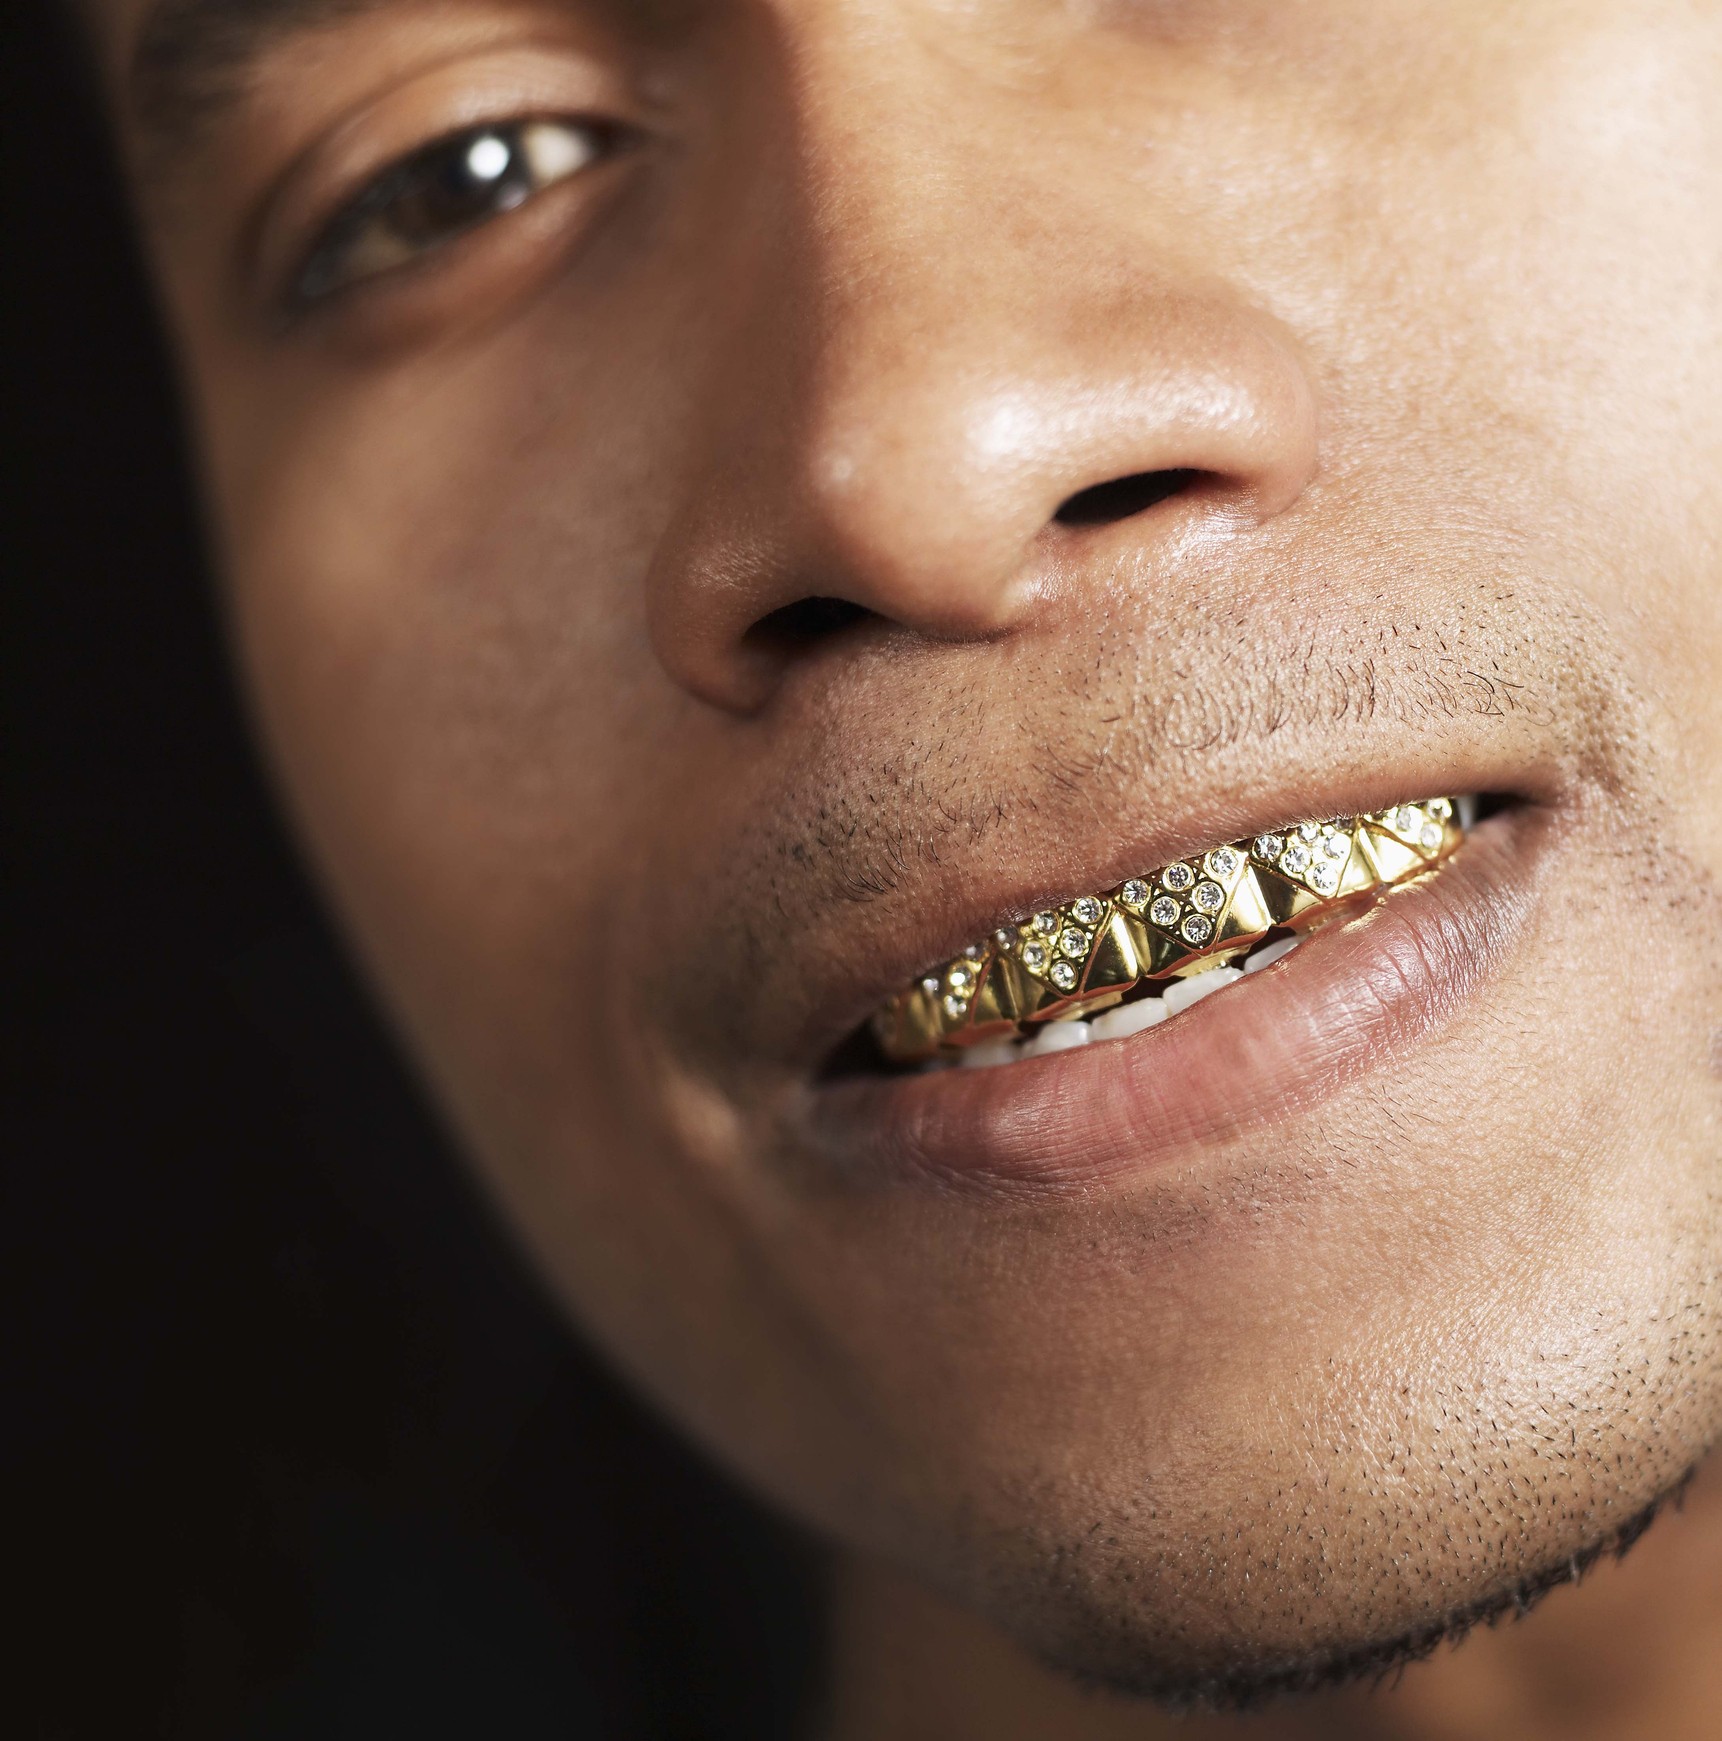 Are Grillz Bad for Your Teeth? | Ingenious Dentistry | Ingenious Dentistry